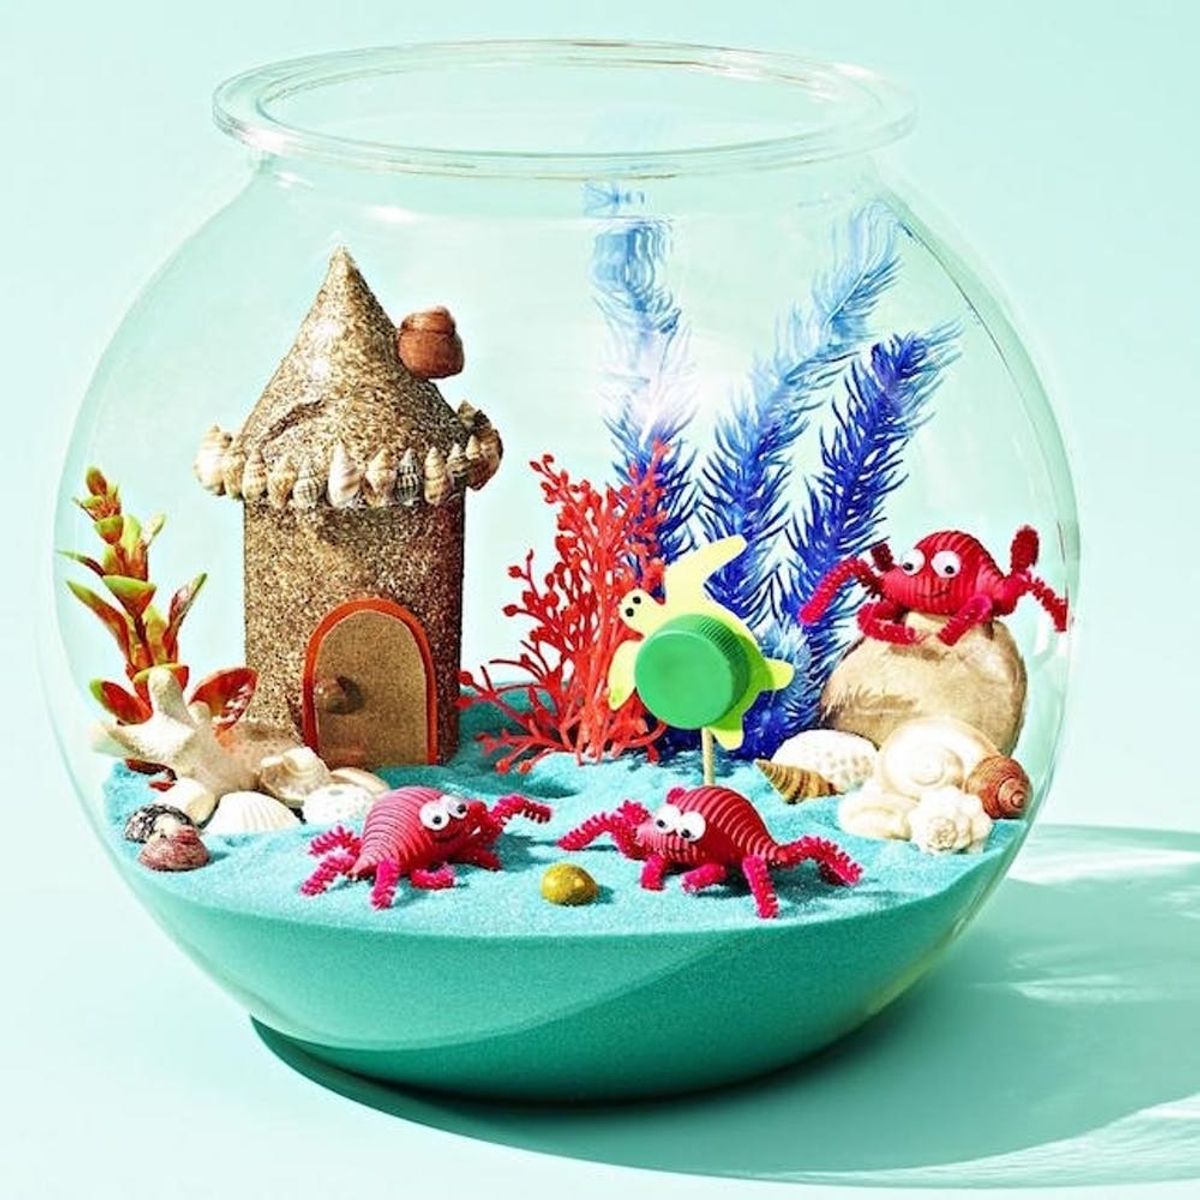 Miniature Mermaid Gardens Are the Coolest Take on Fairy Gardens